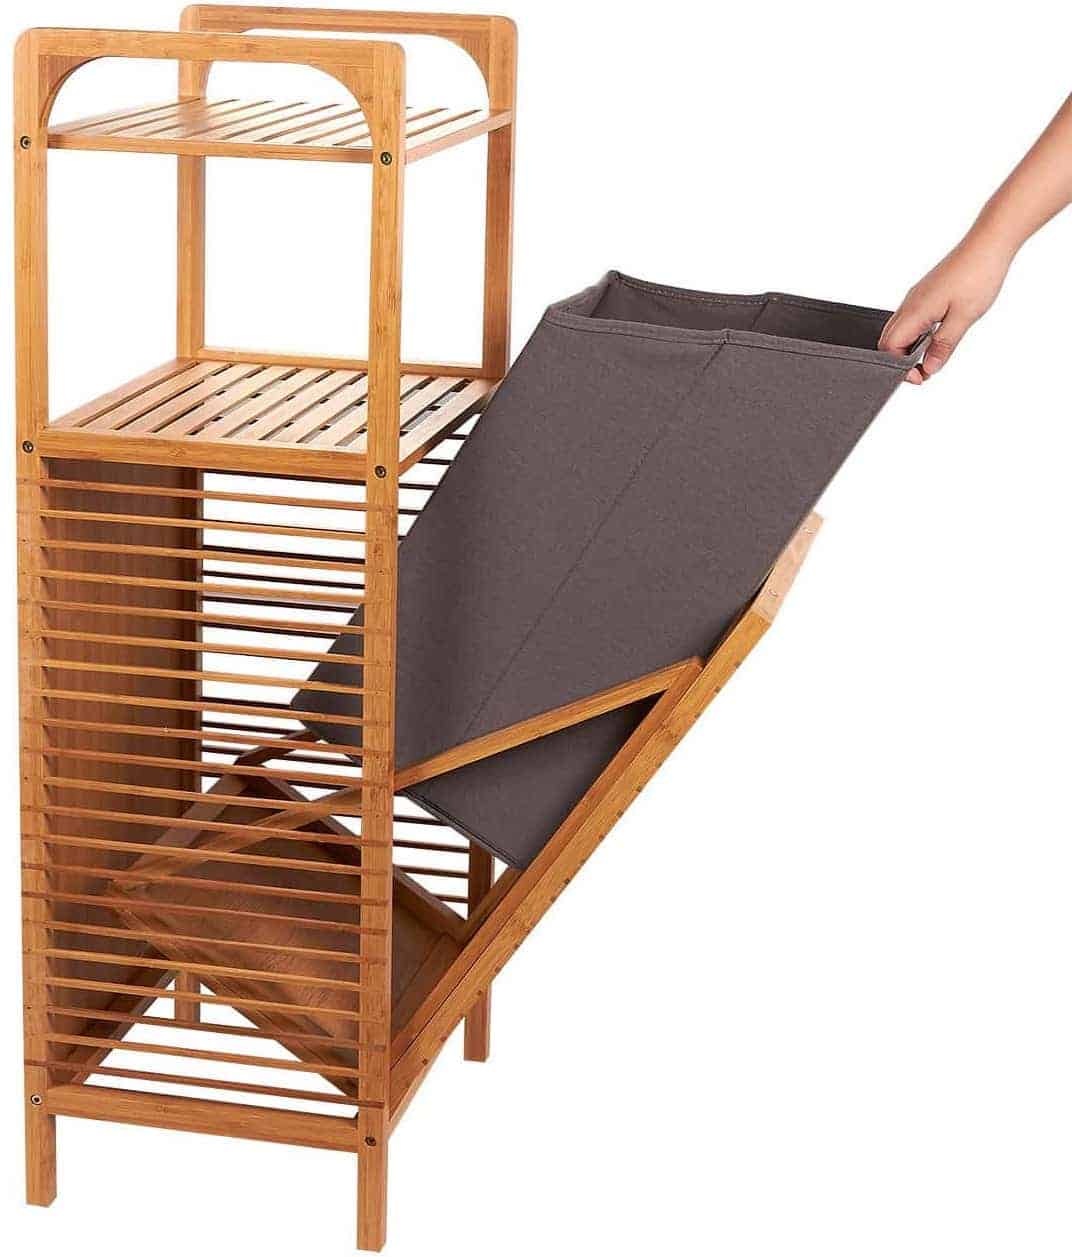 laundry hampers for closet organization